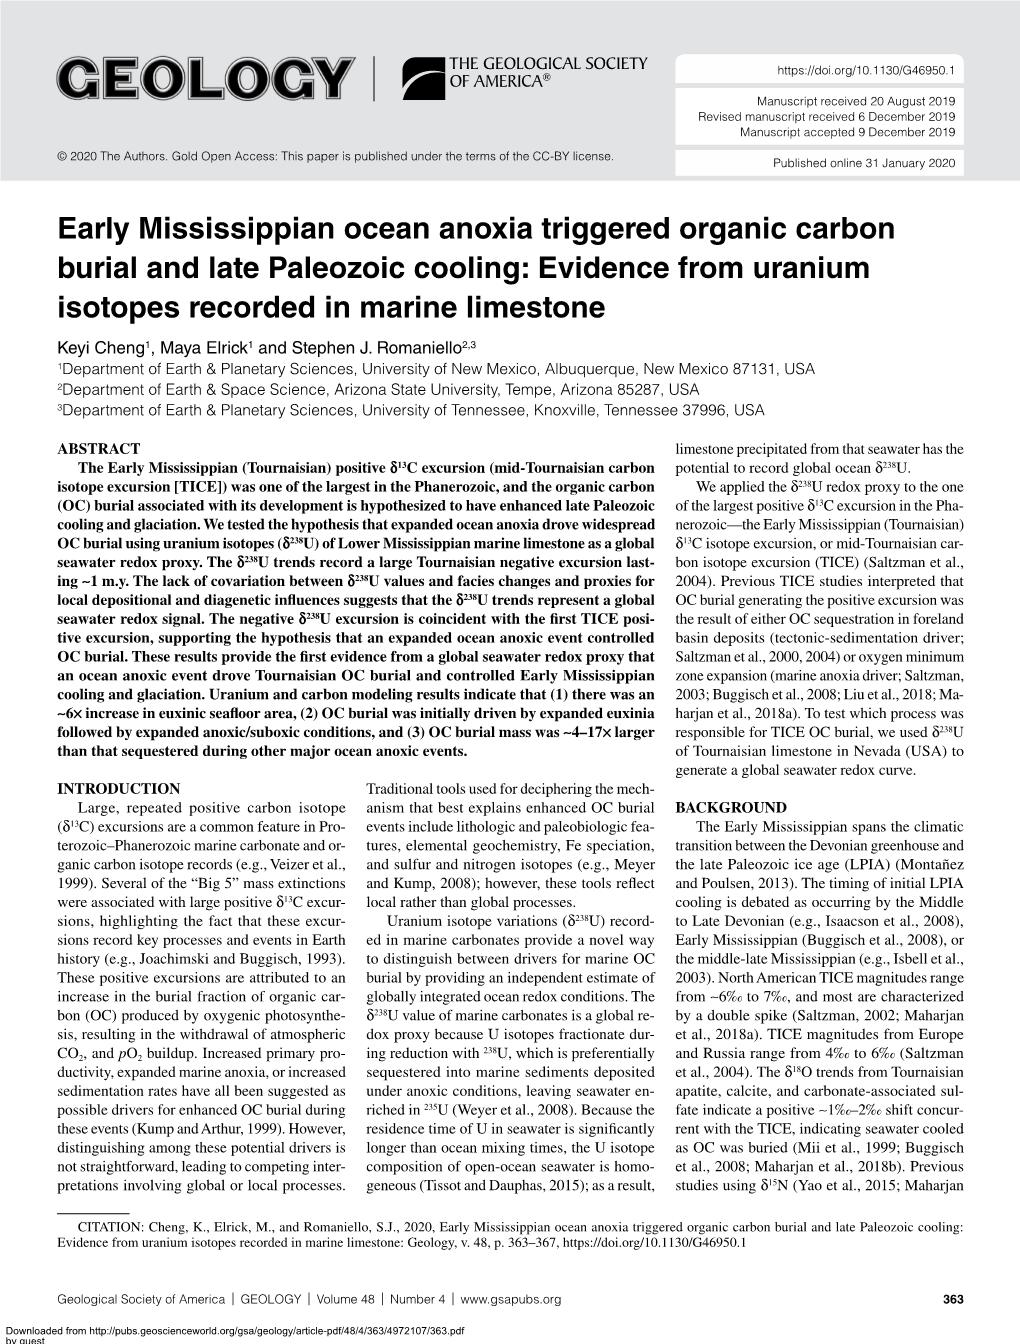 Early Mississippian Ocean Anoxia Triggered Organic Carbon Burial And